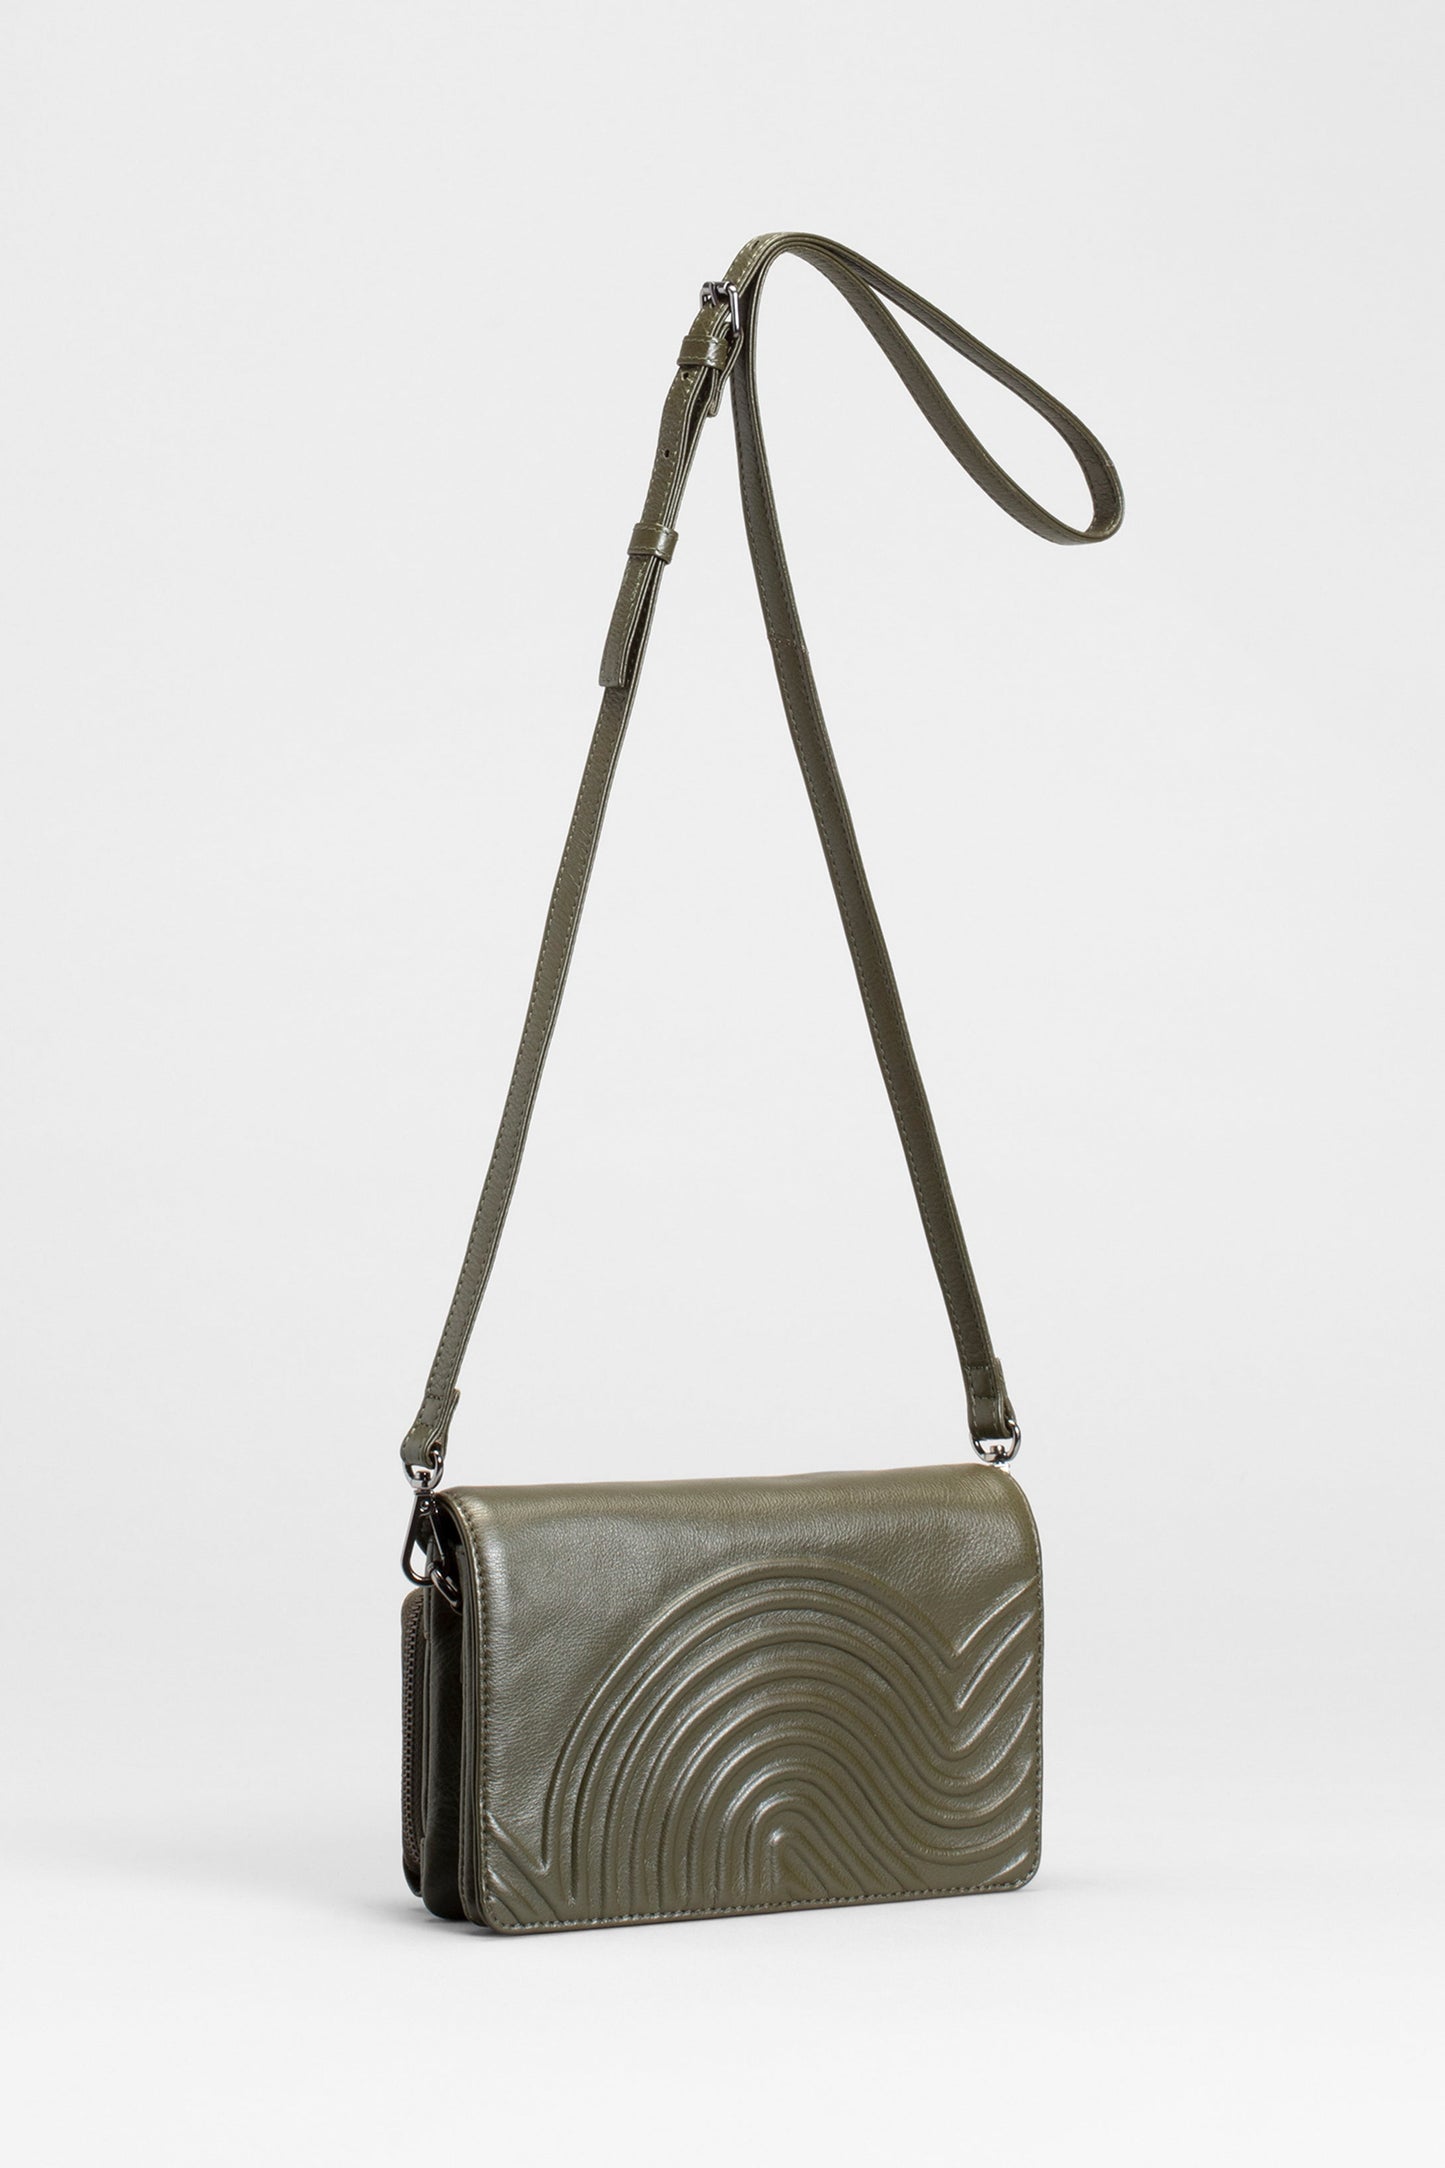 Virla Remnant Leather Patterned Texture Crossbody Hand Bag front OLIVE